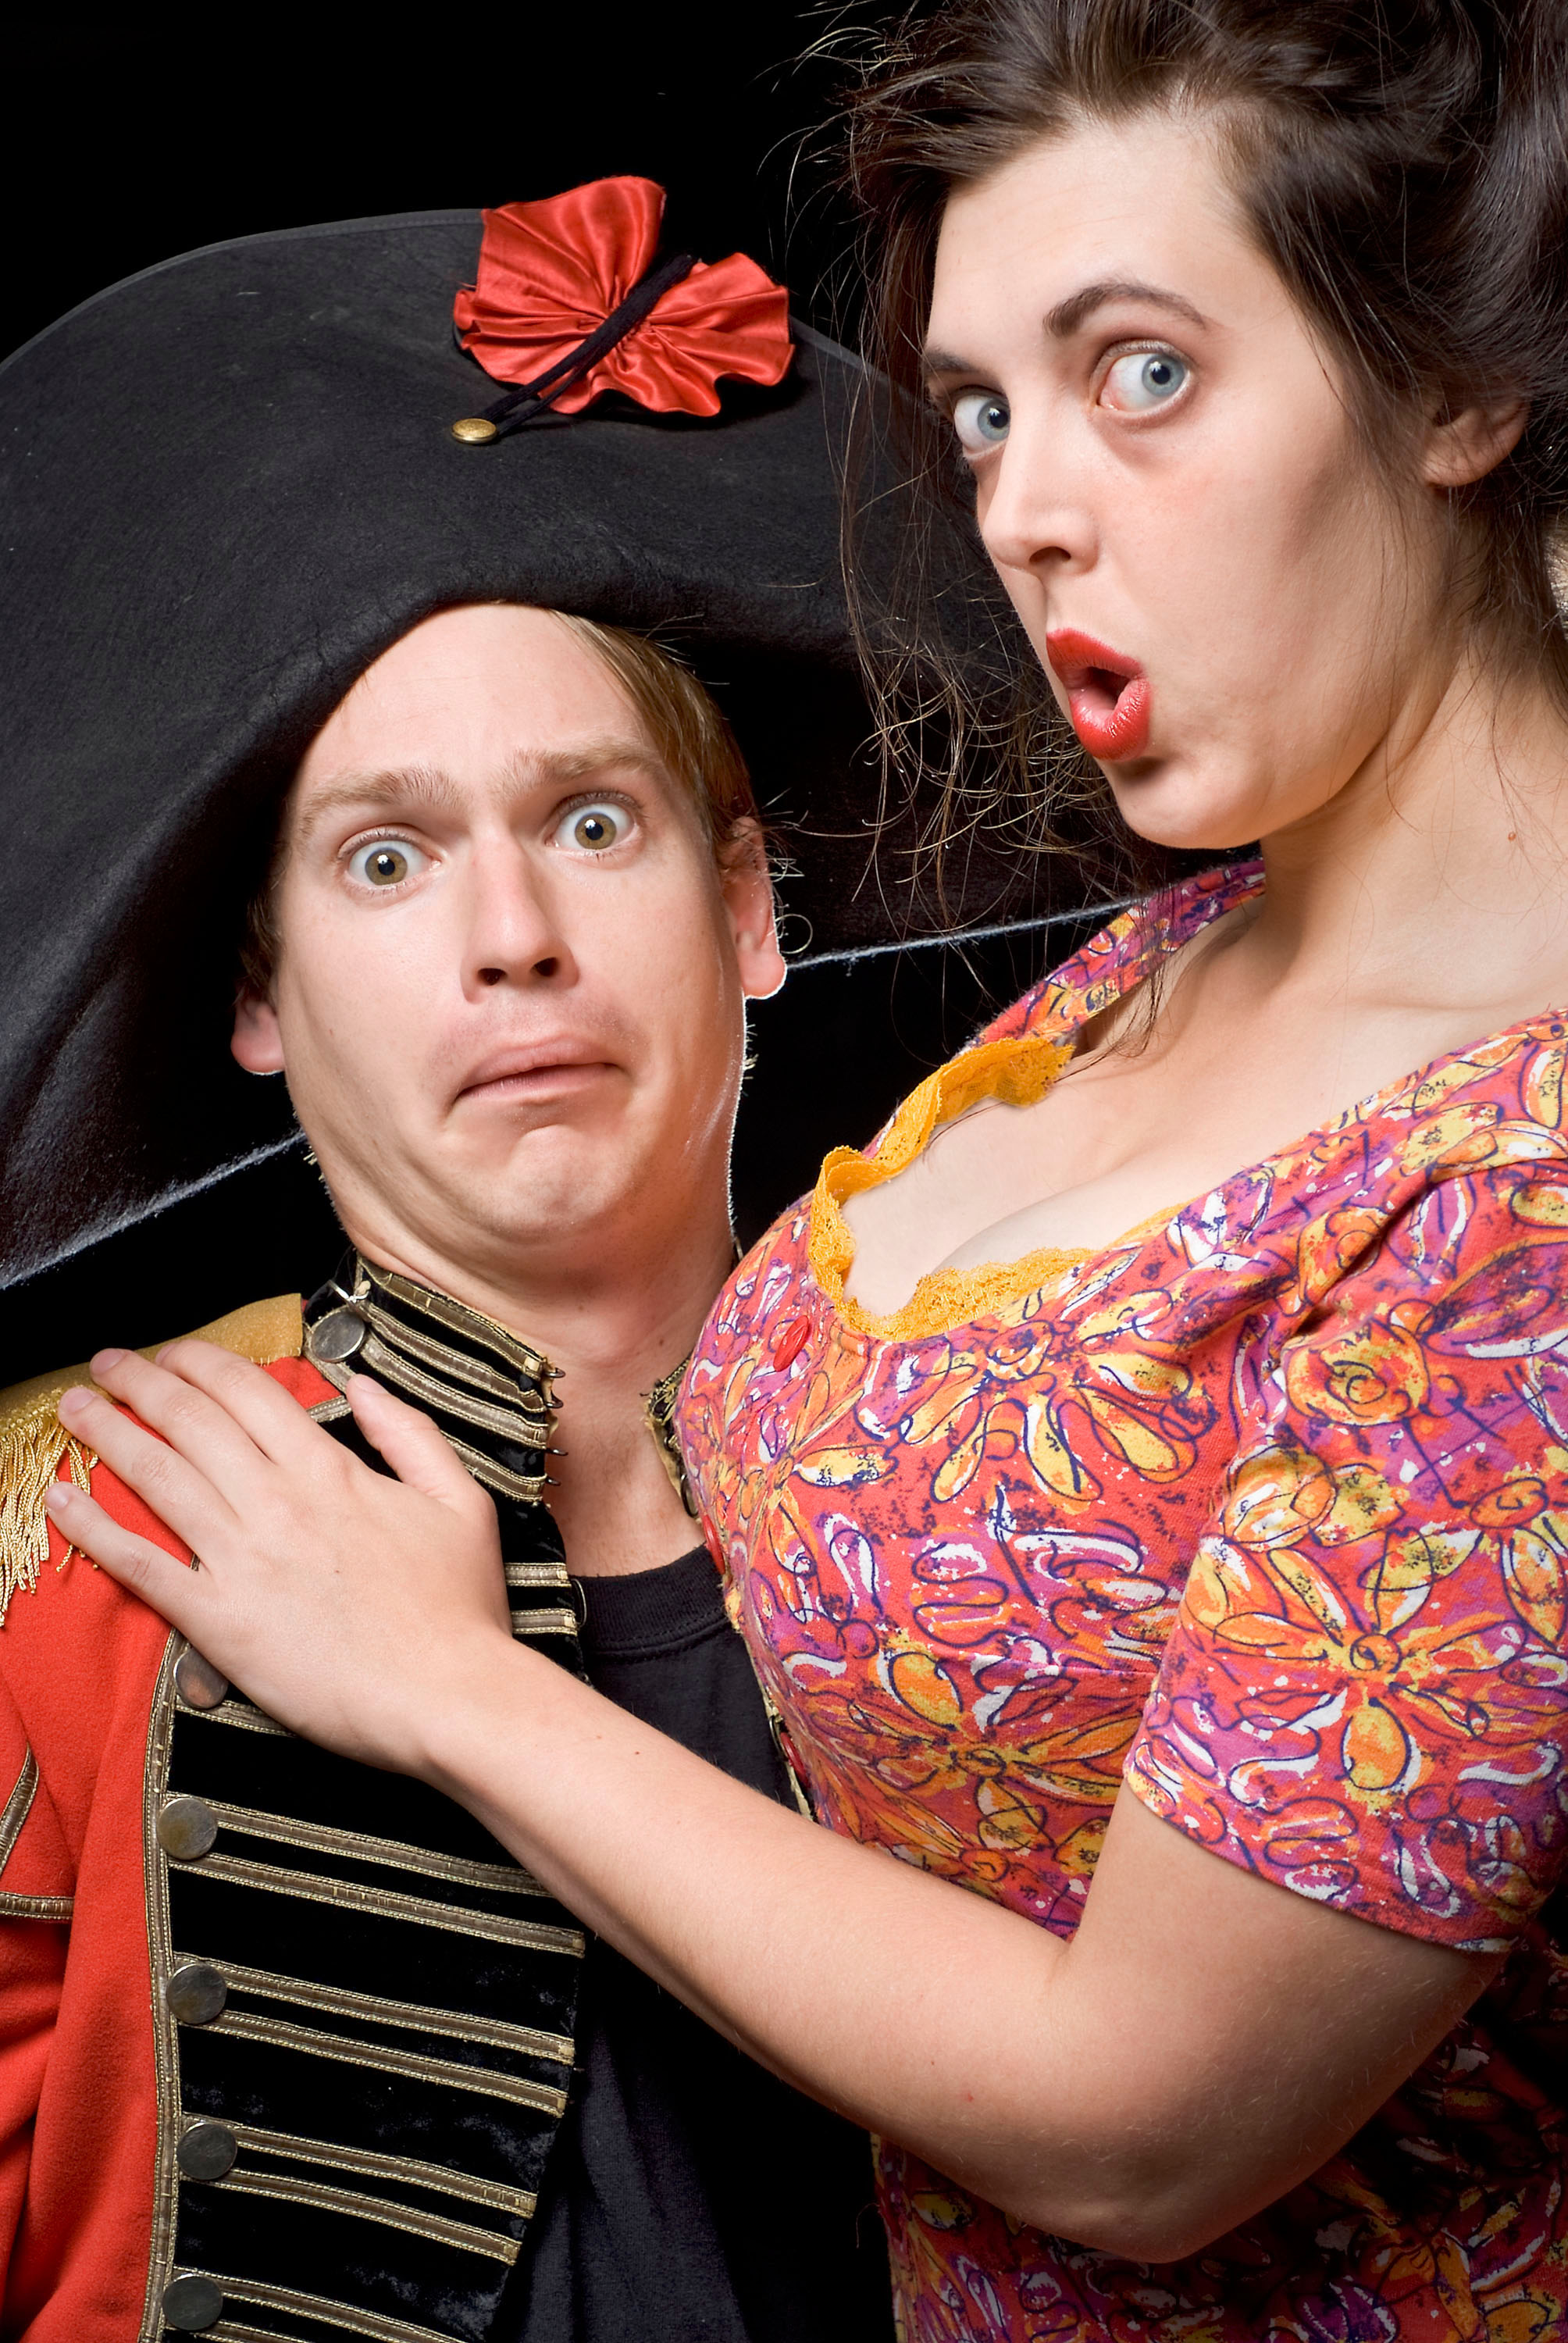 A Man holds a women during a scene in a play